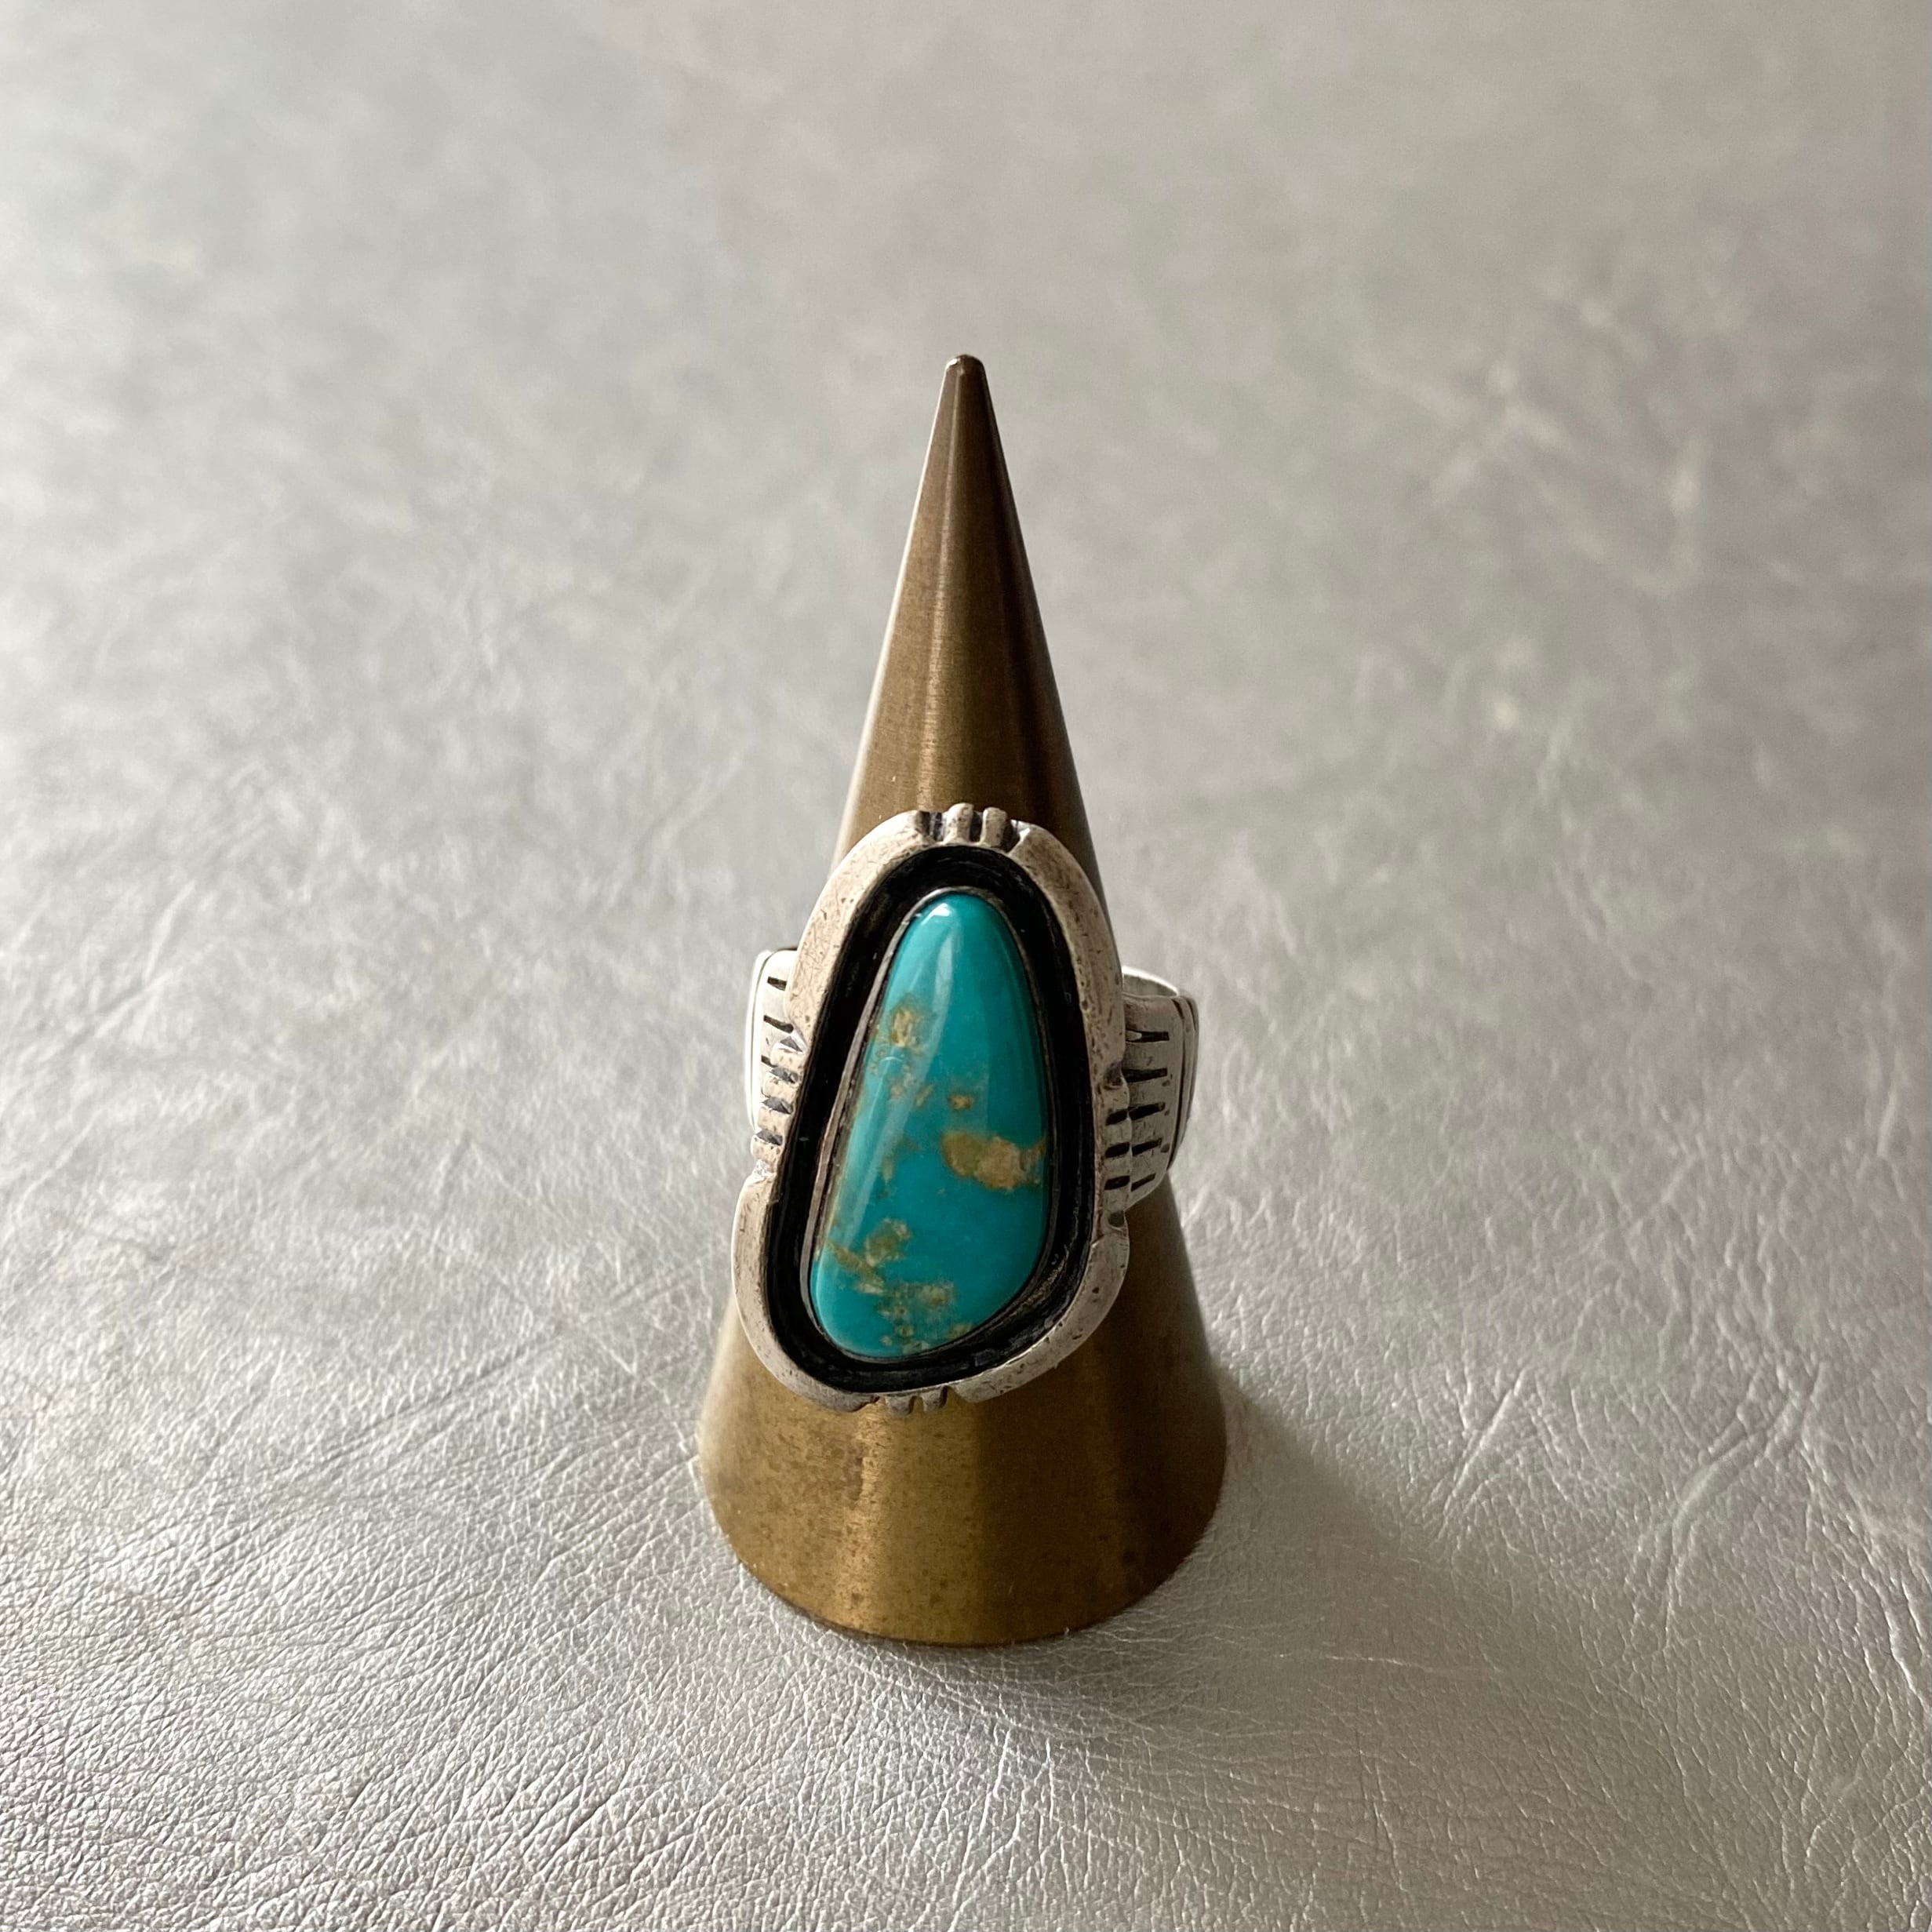 Vintage USA sterling turquoise ring ヴィンテージ ネイティブアメリカン フィリップ・サンチェス  シルバー925 天然石 ターコイズ リング POOL VINTAGE